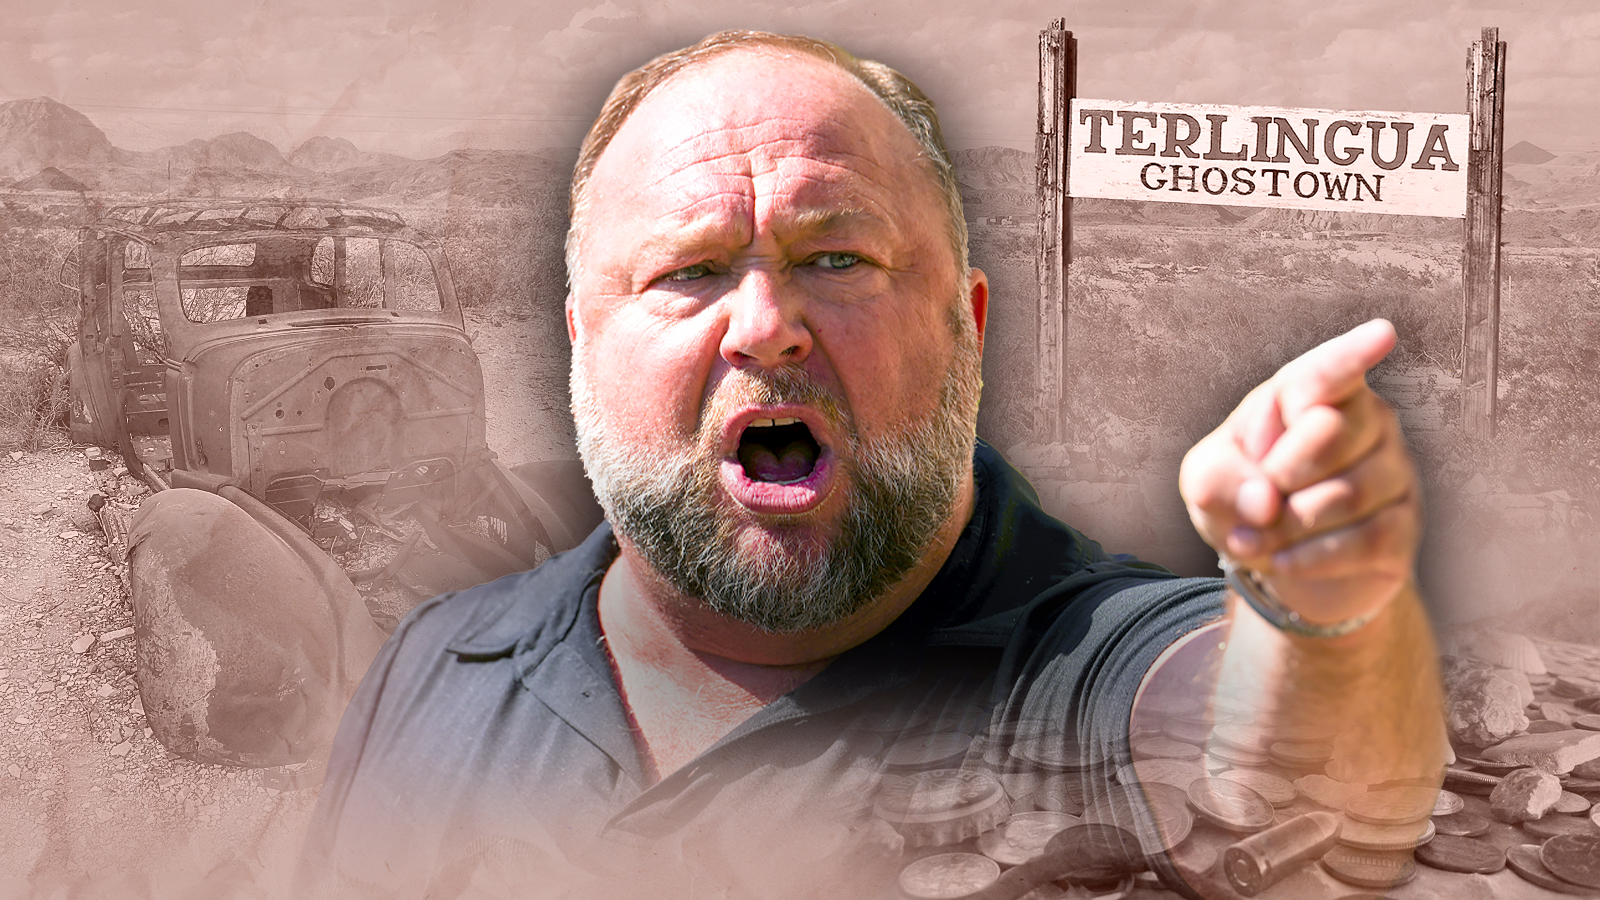 Alex Jones has joined the outcasts and eccentrics who have found a home in the self-declared ghost town